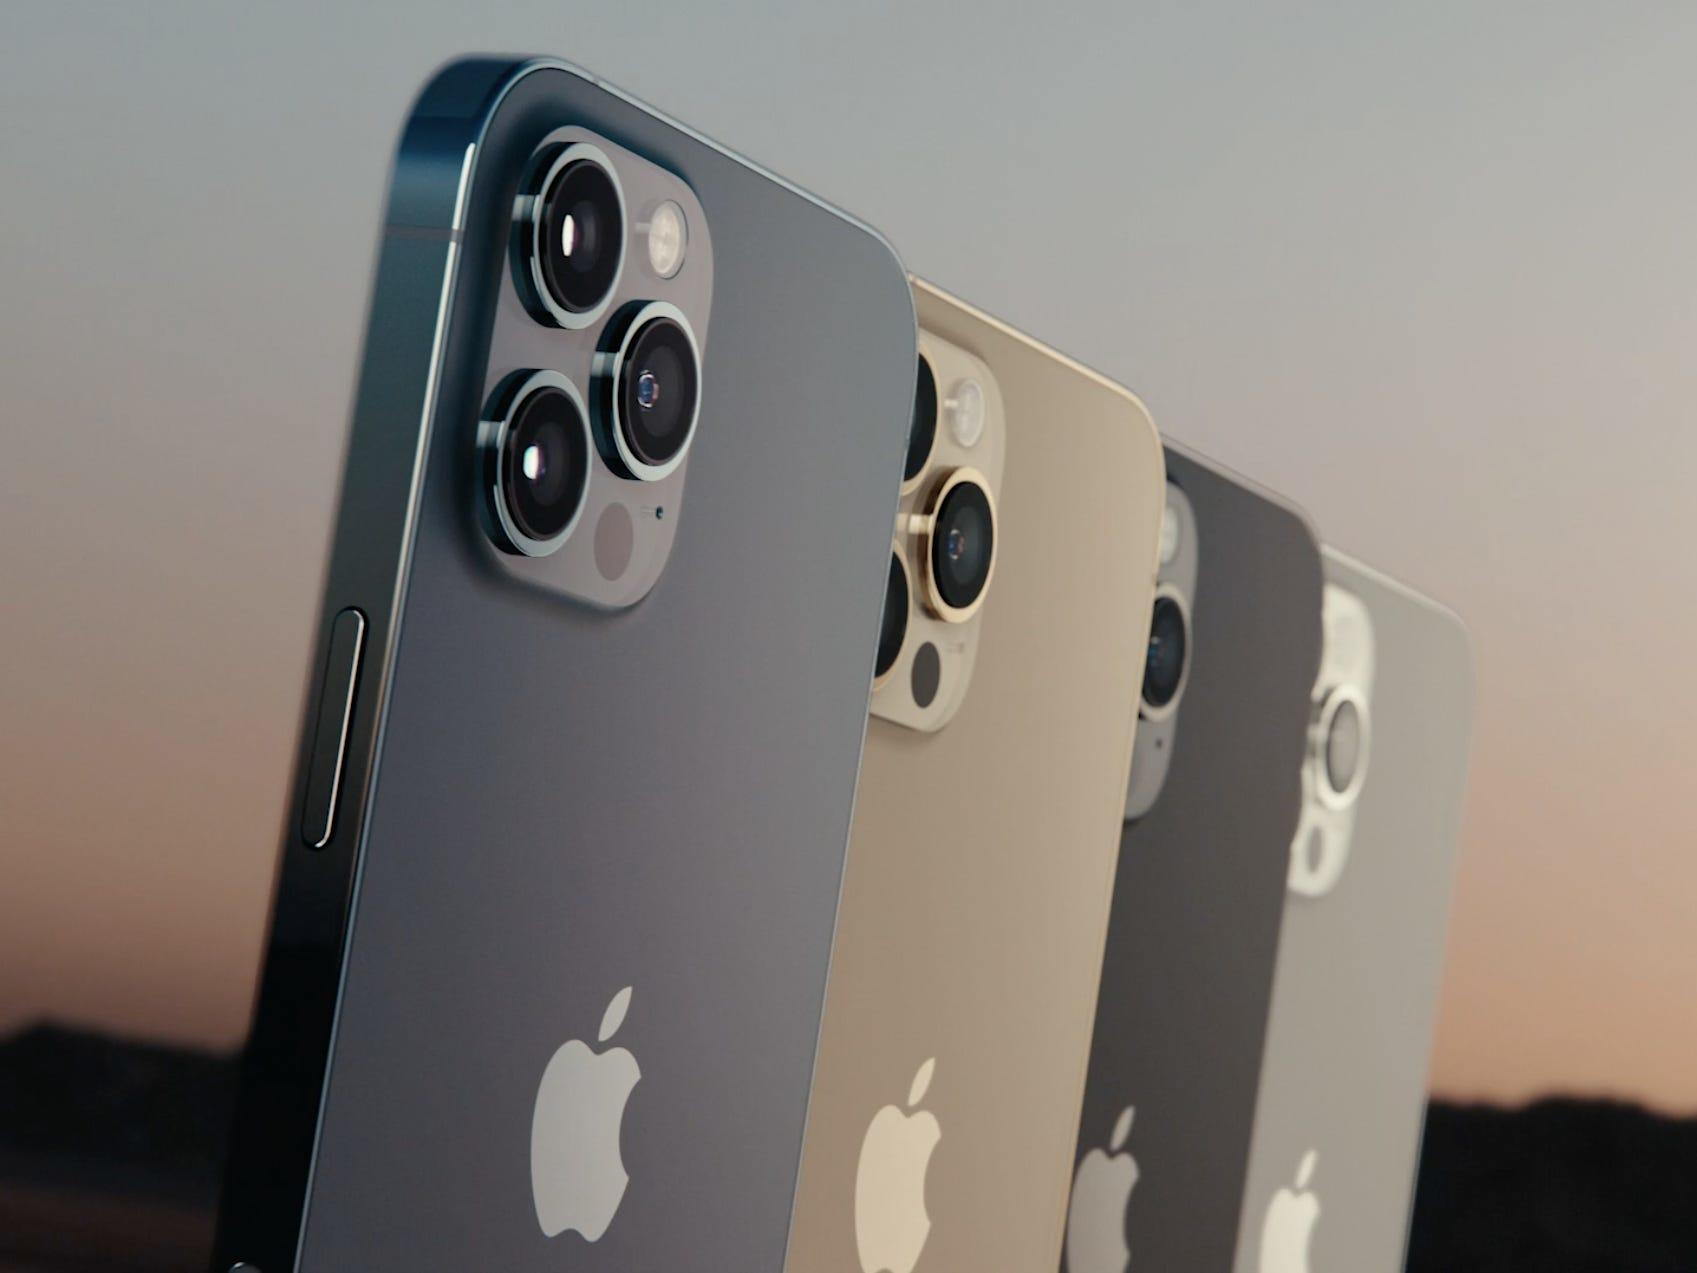 The iPhone 12 Pro is available in 4 colors â€